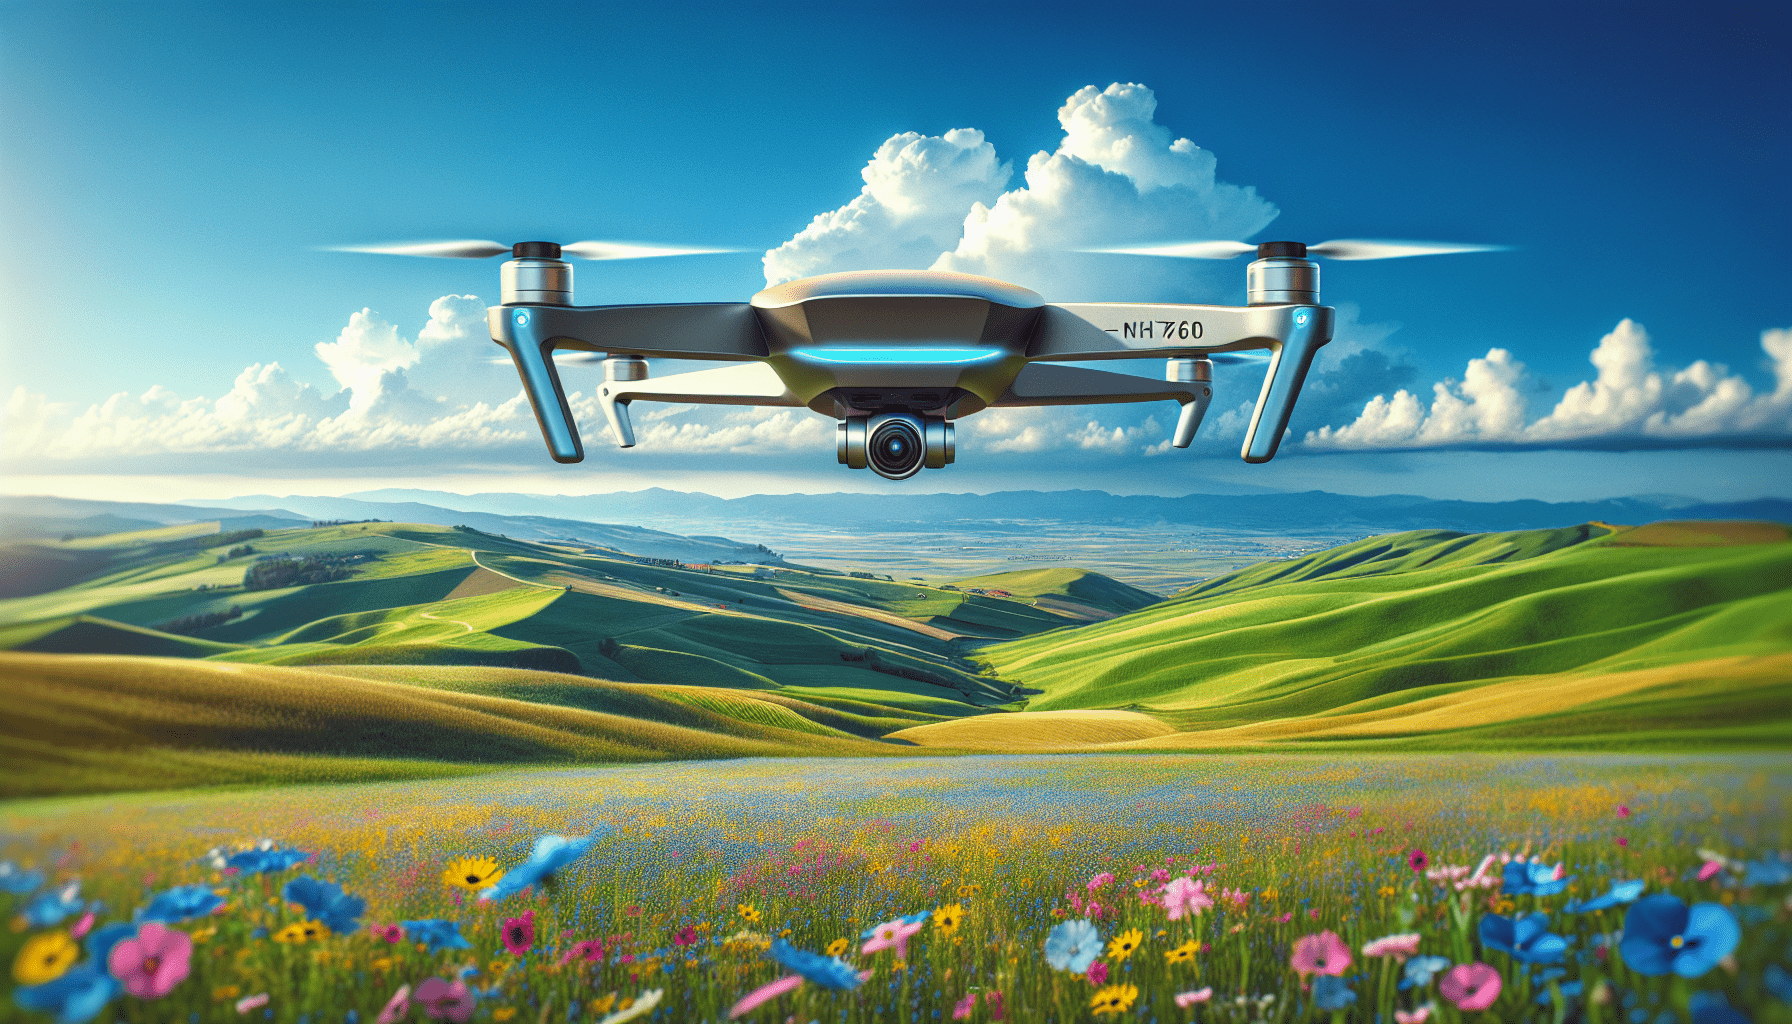 Review of the 5 Best Drones Under $100 in 2023